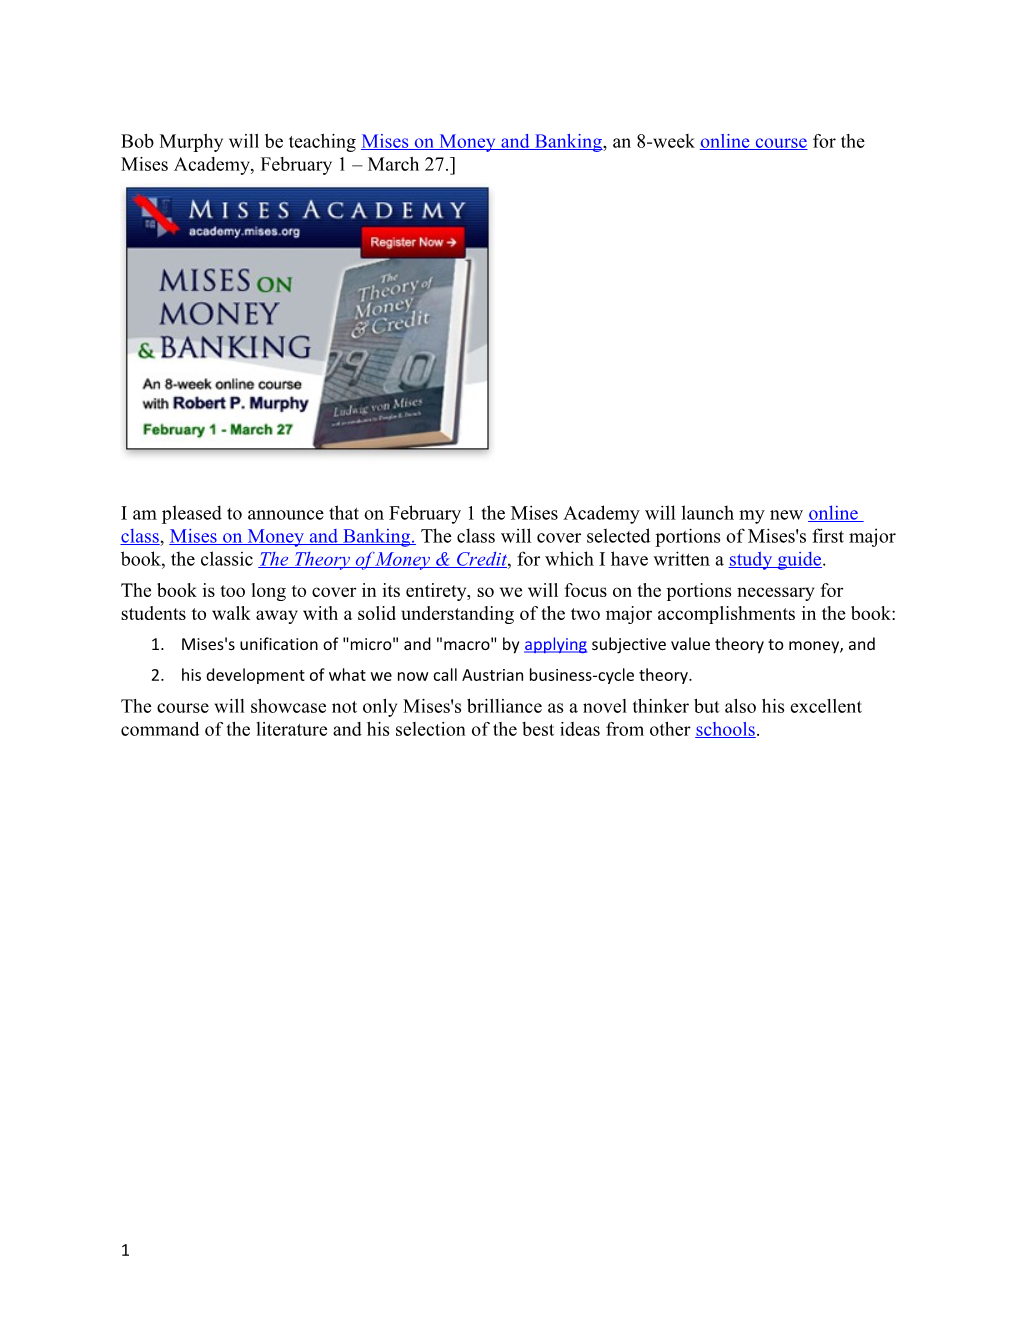 Bob Murphy Will Be Teaching Mises on Money and Banking, an 8-Week Online Course for The